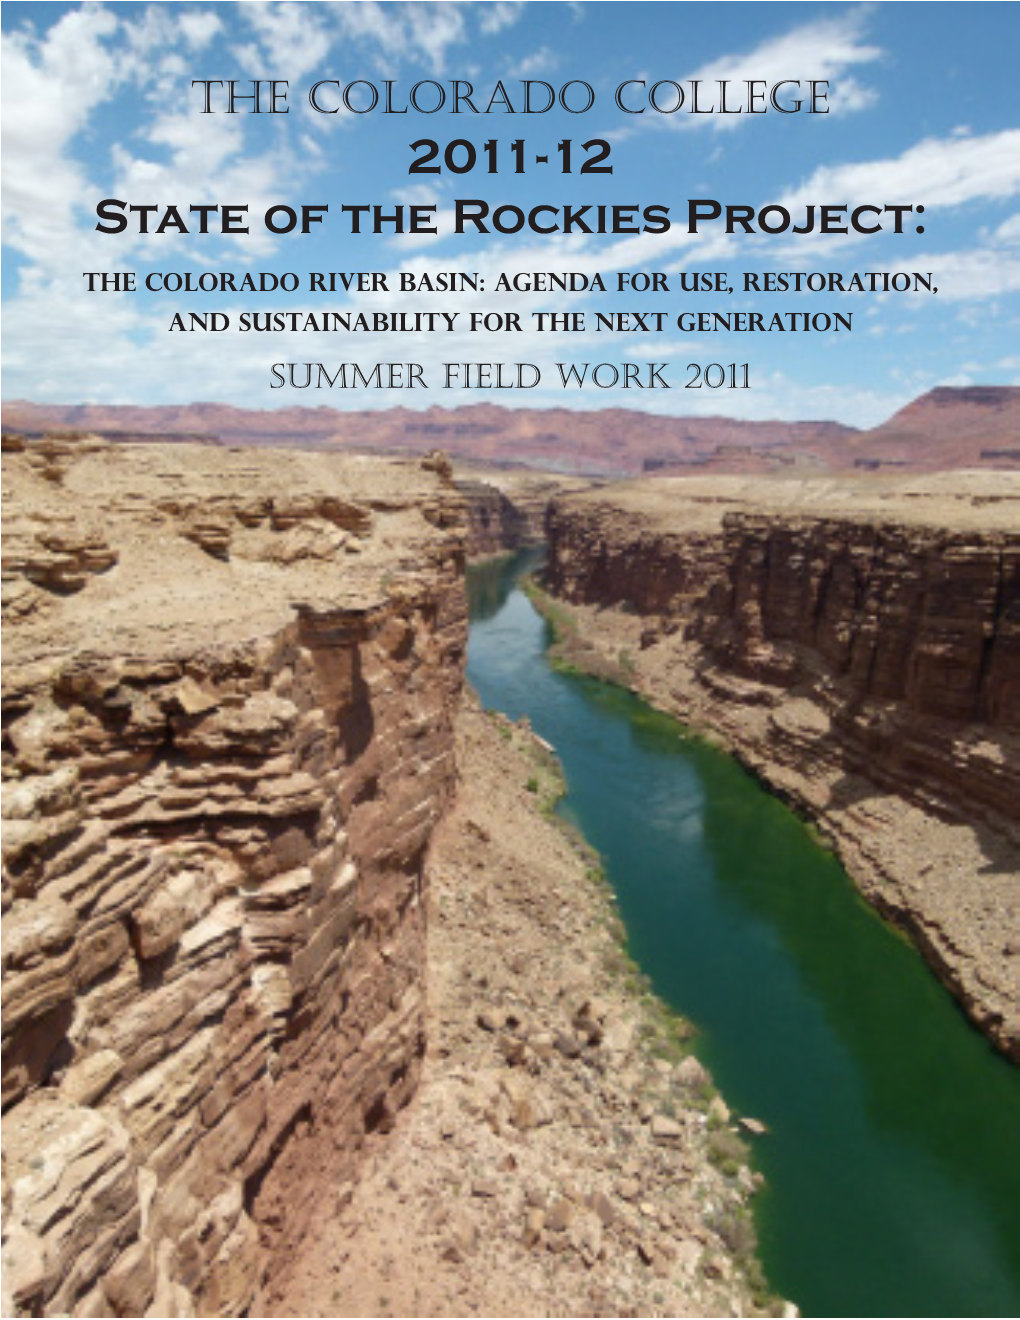 2011-12 State of the Rockies Project